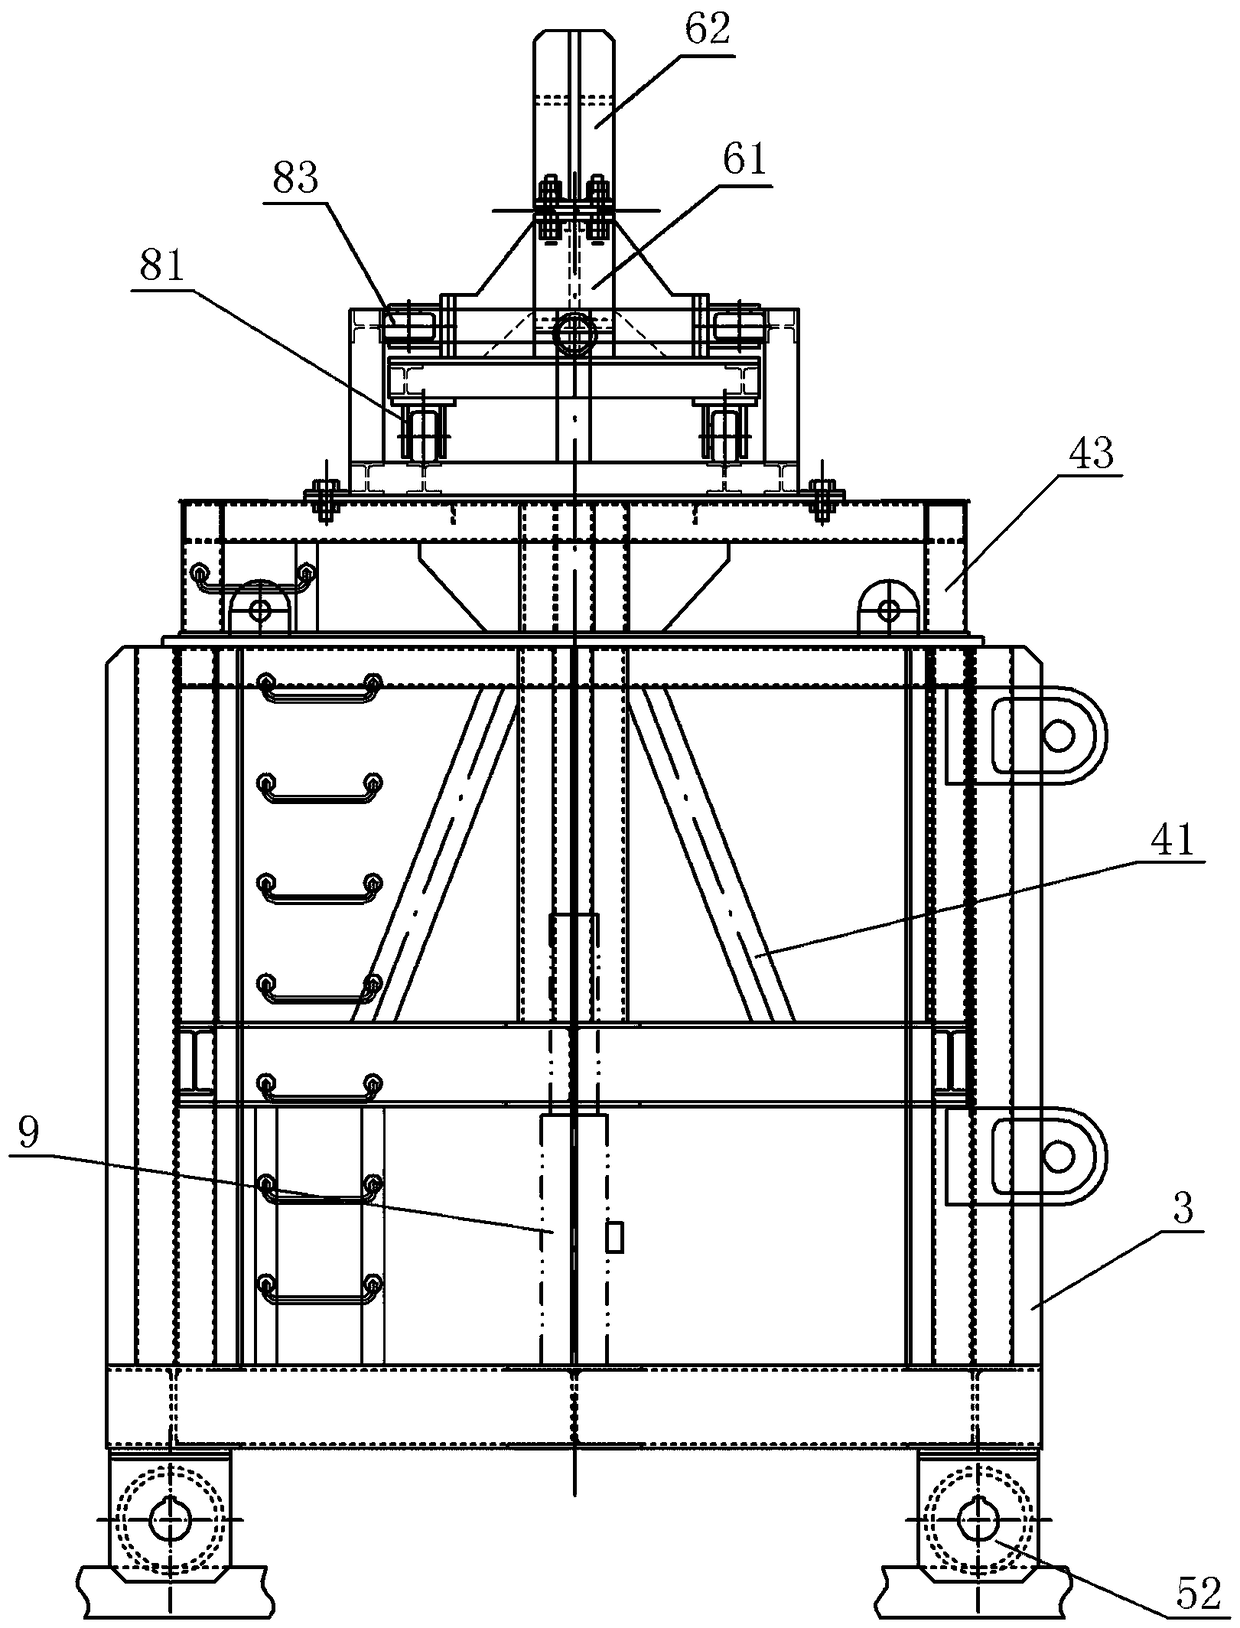 A method for installing a ship stern shaft